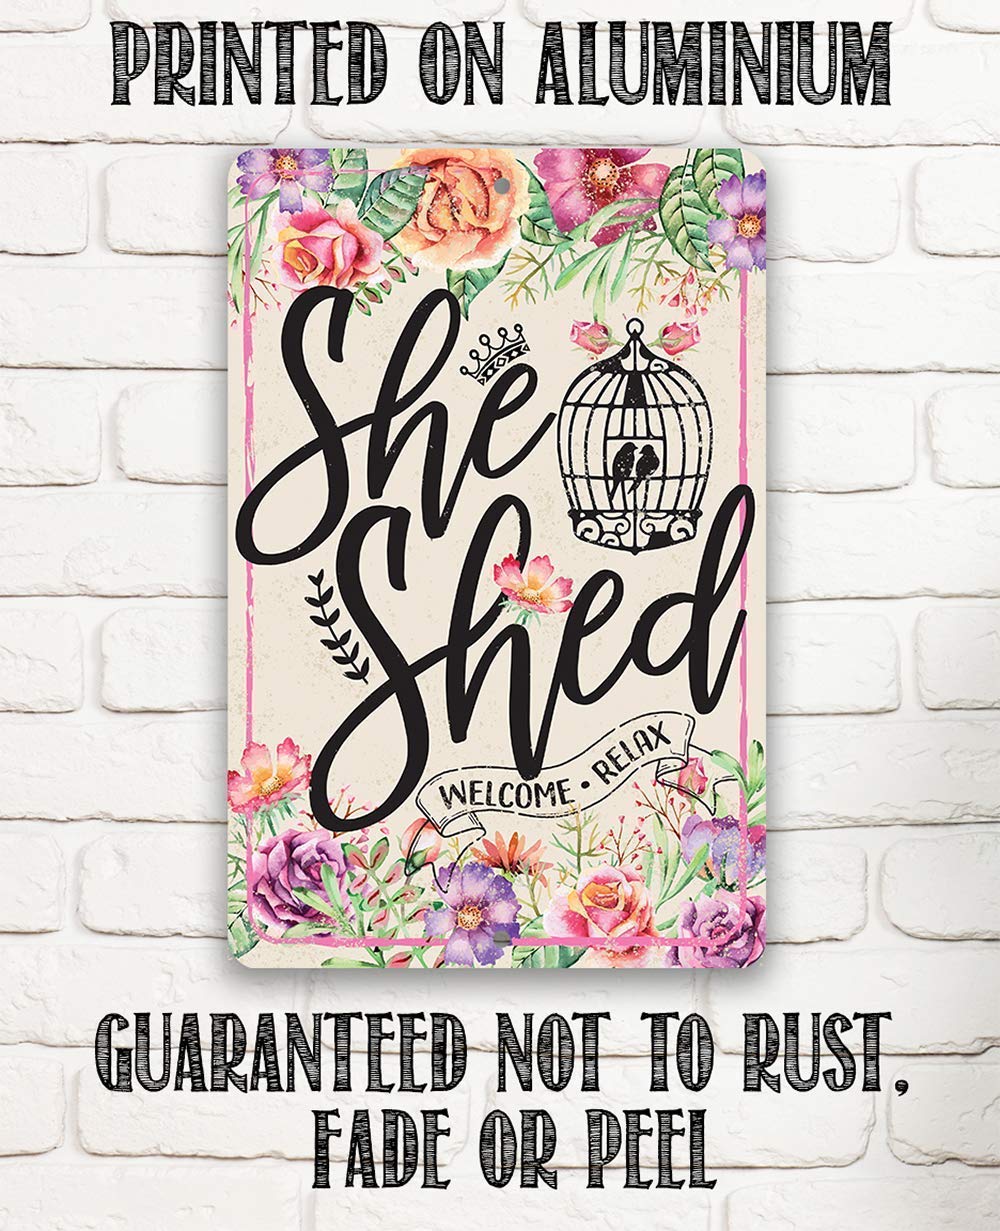 Personalized - Bitch Barn - Retro Vintage She Shed Decor, Greenhouse Garden Display, Backyard Floral Accessories, Babe Cave Sign and Gifts for Women, 8x12 or 12x18 Indoor or Outdoor Durable Metal Sign